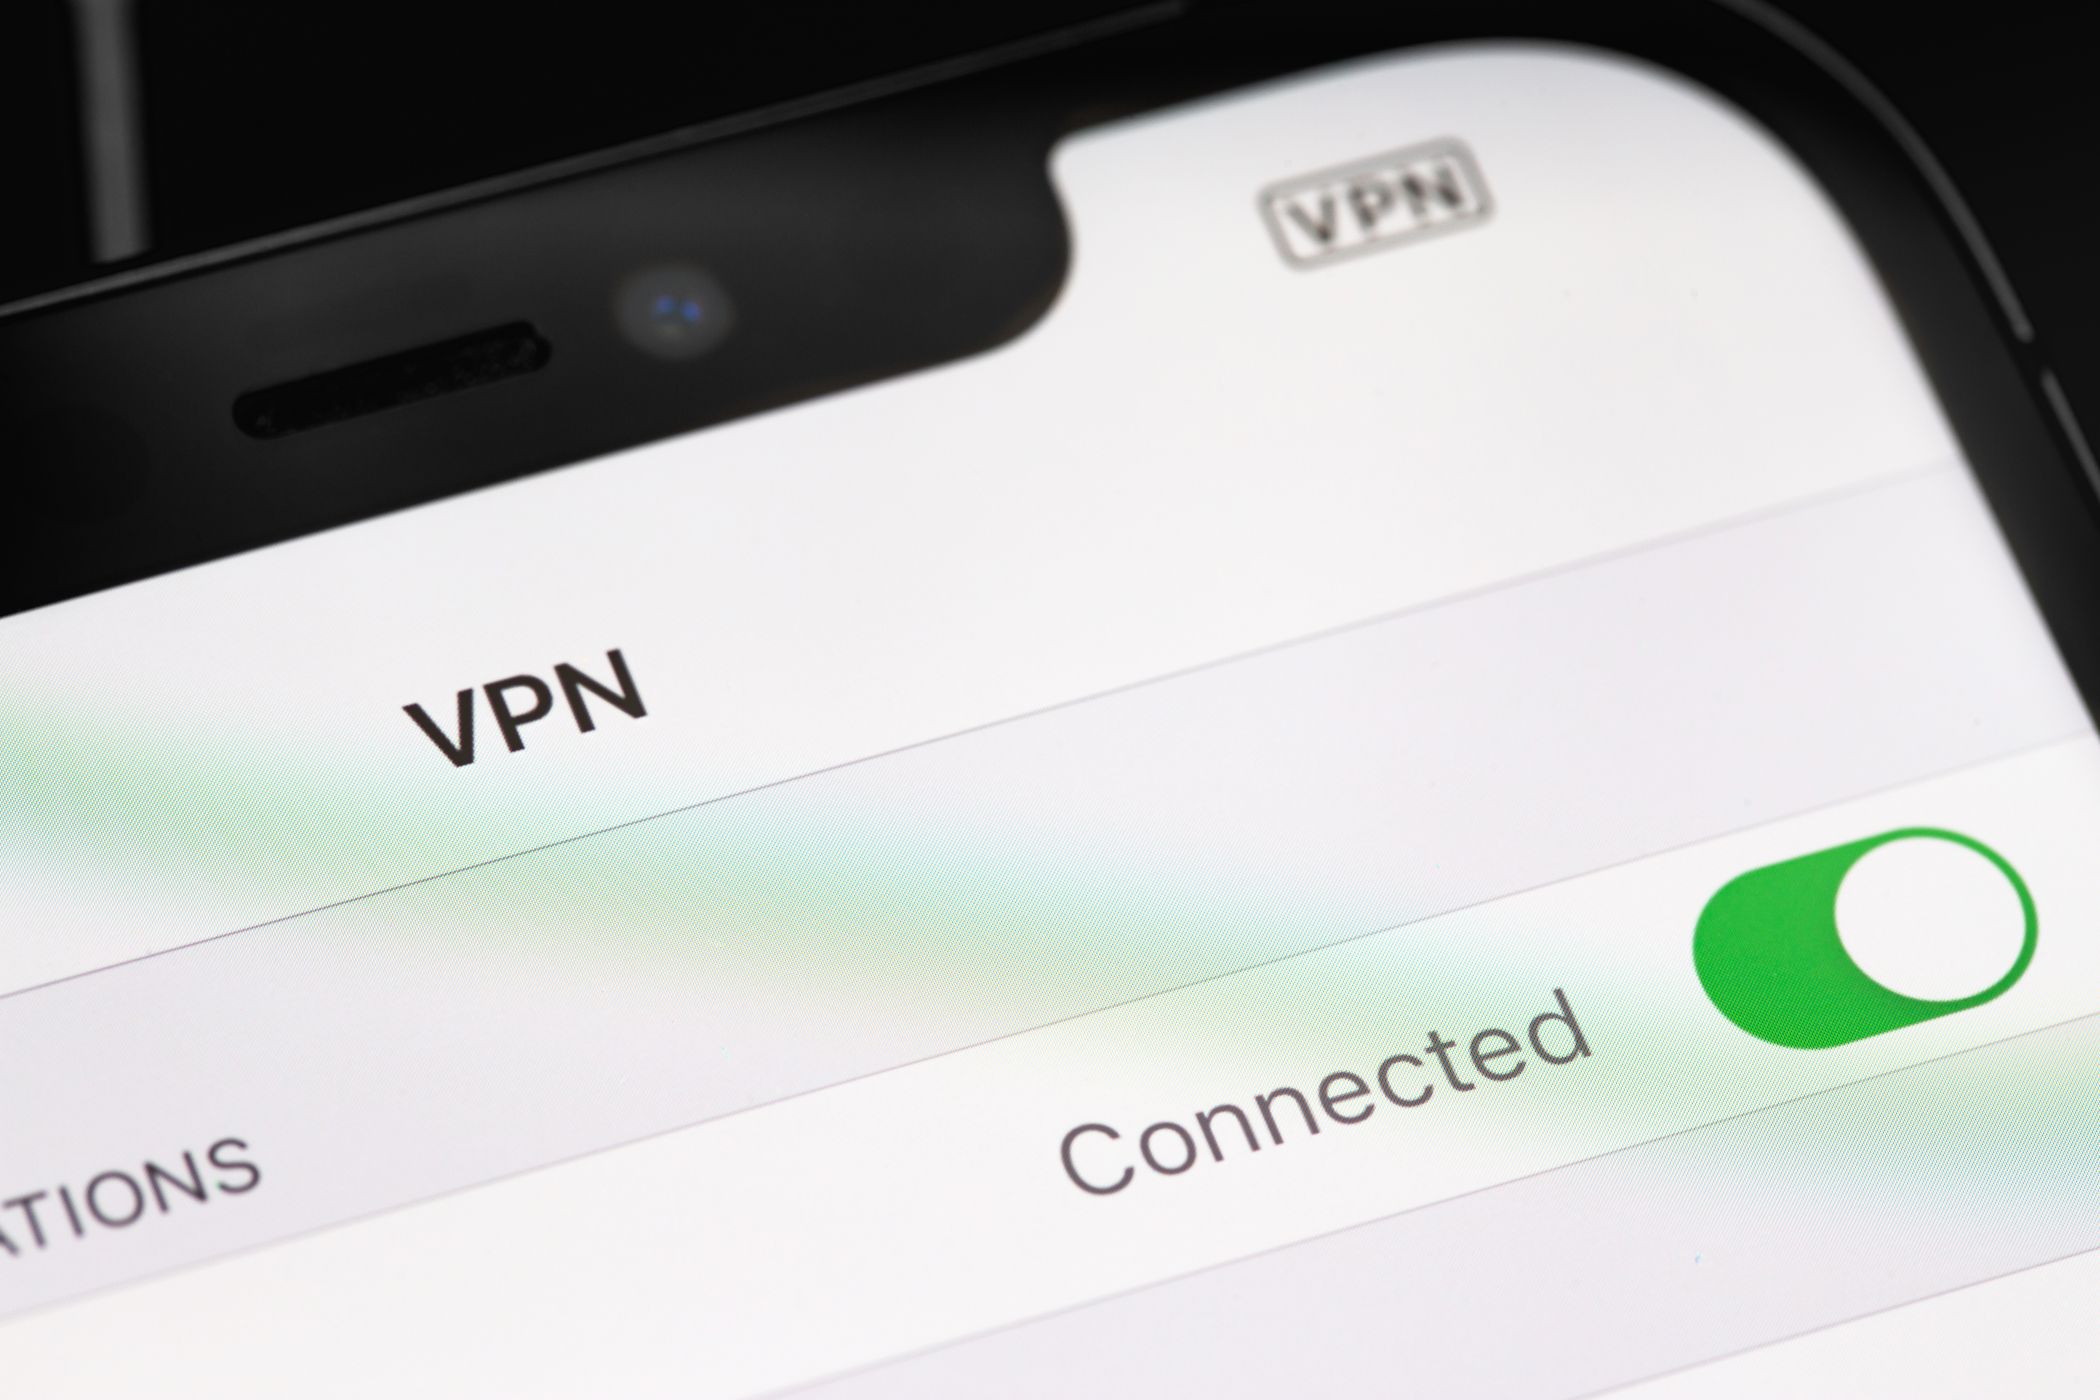 vpn connected on ios device